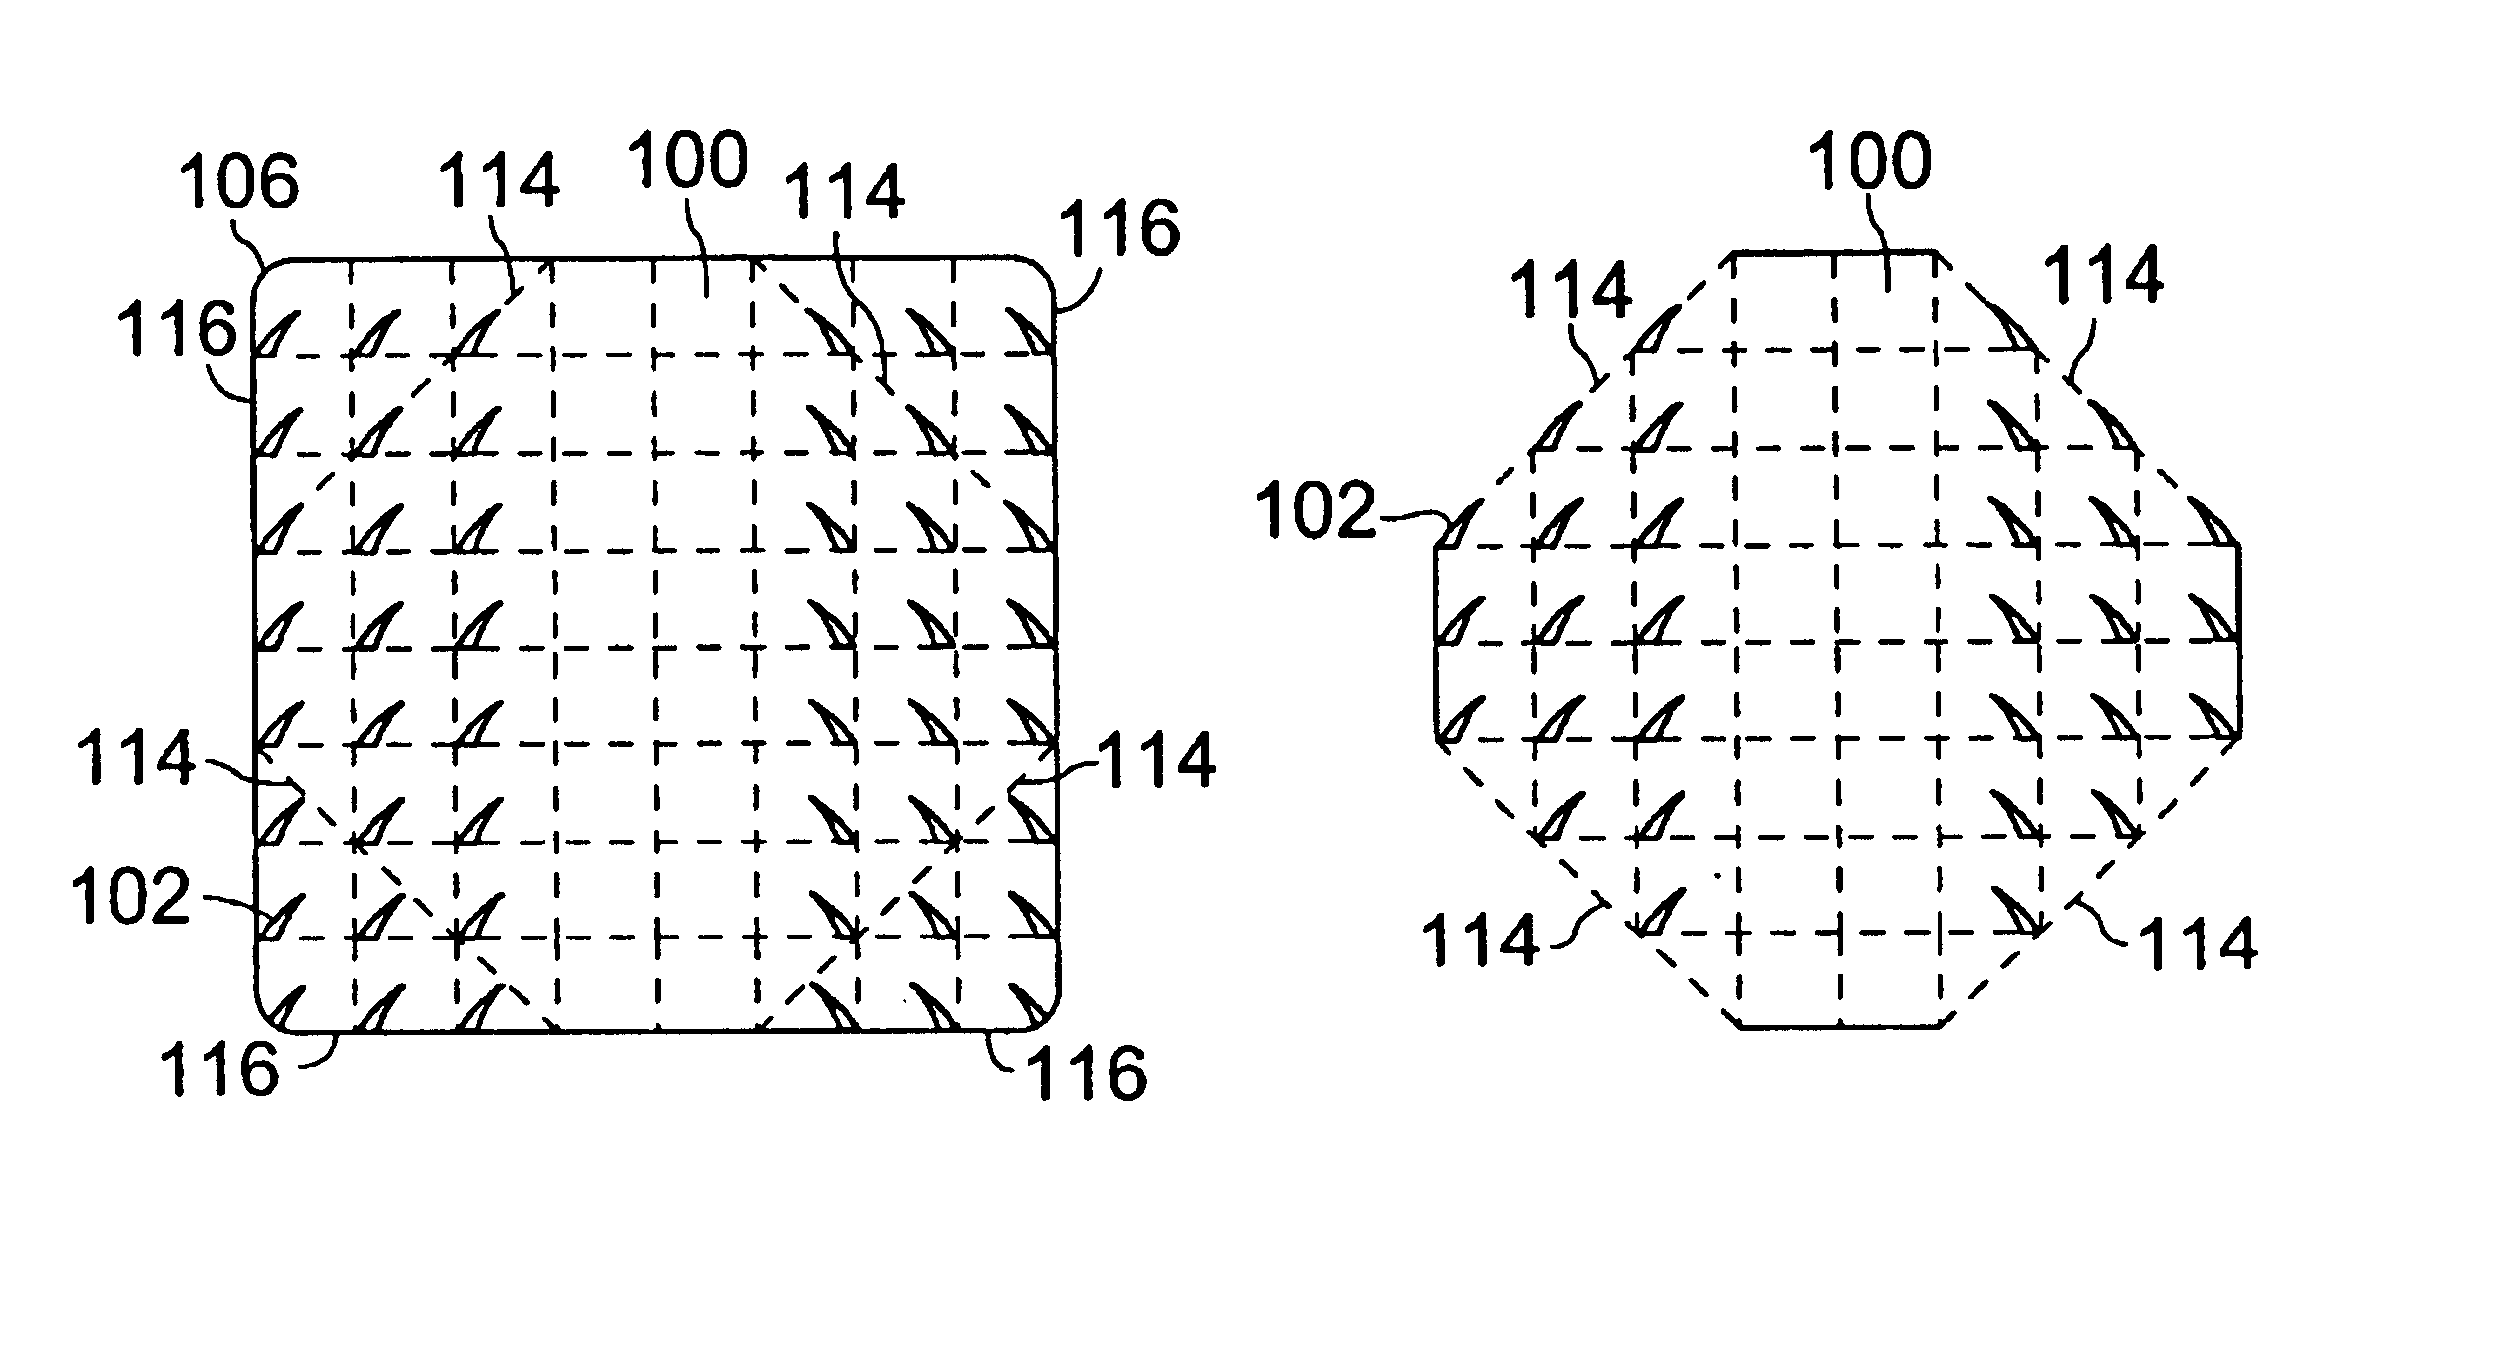 Multi-point tension distribution system device and method of tissue approximation using that device to improve wound healing